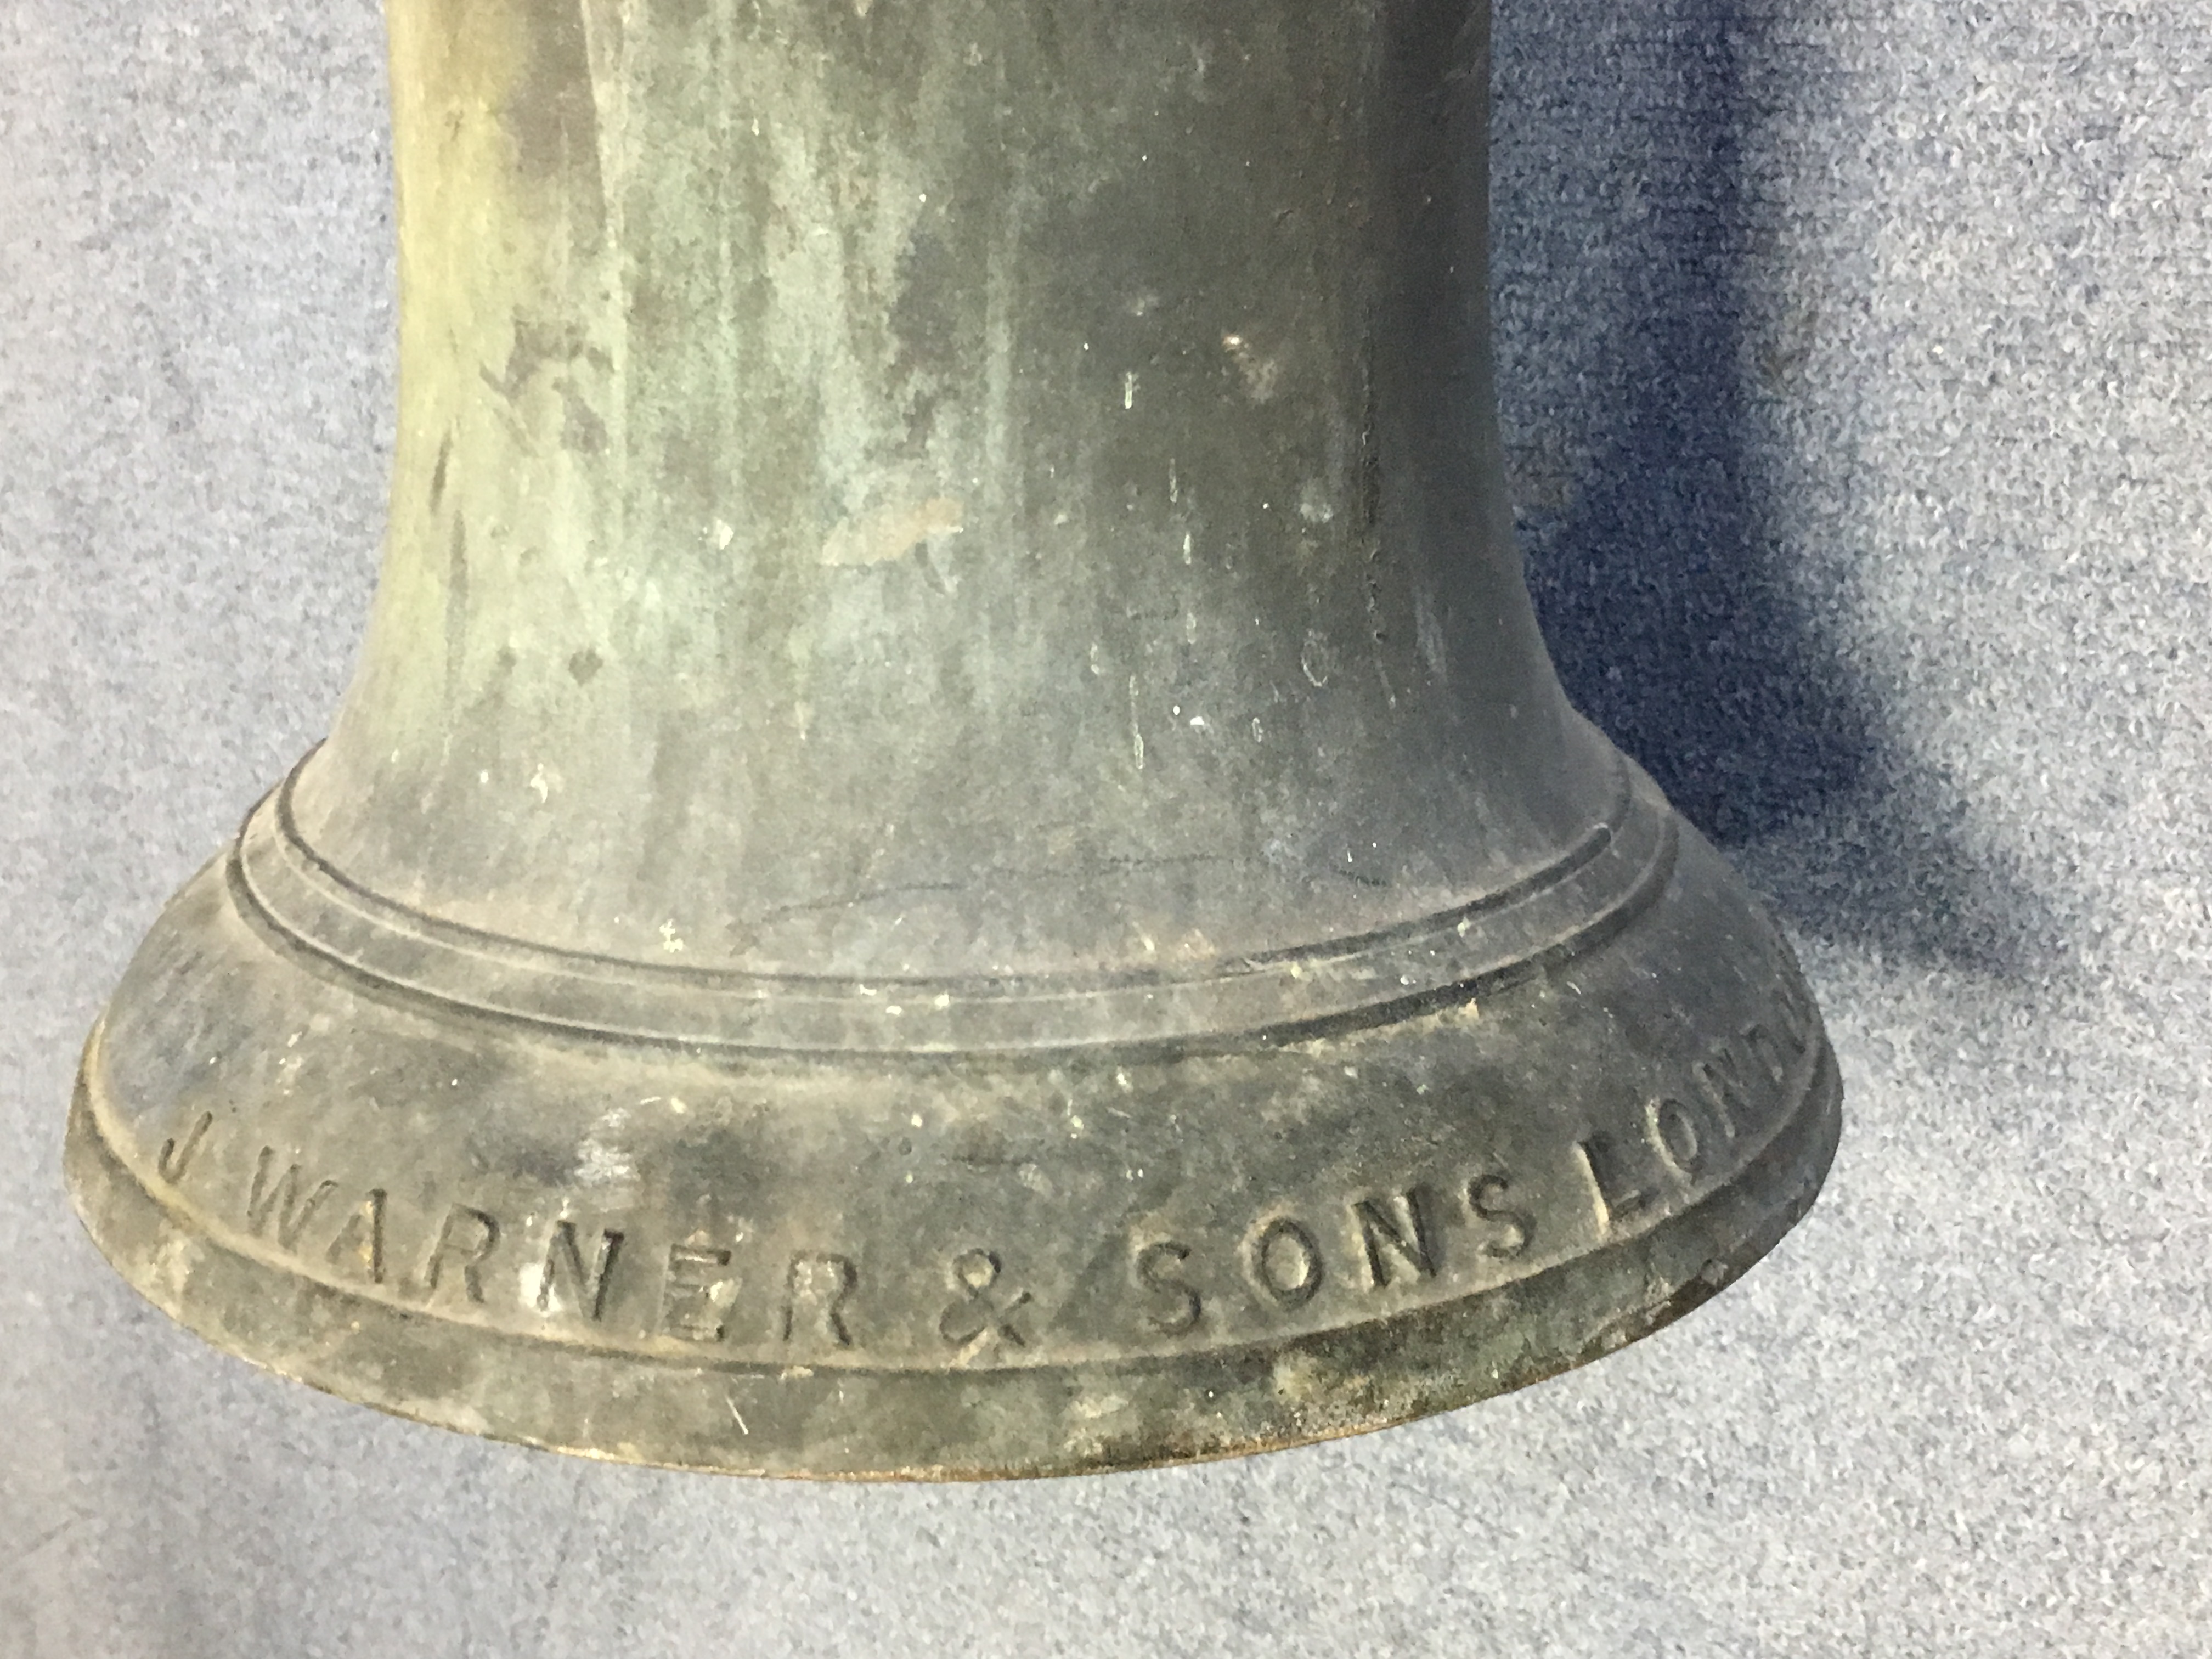 A 19th century BRONZE BELL cast by I WARNER & SONS, LONDON, dated 1873; with original clapper & iron - Image 2 of 3